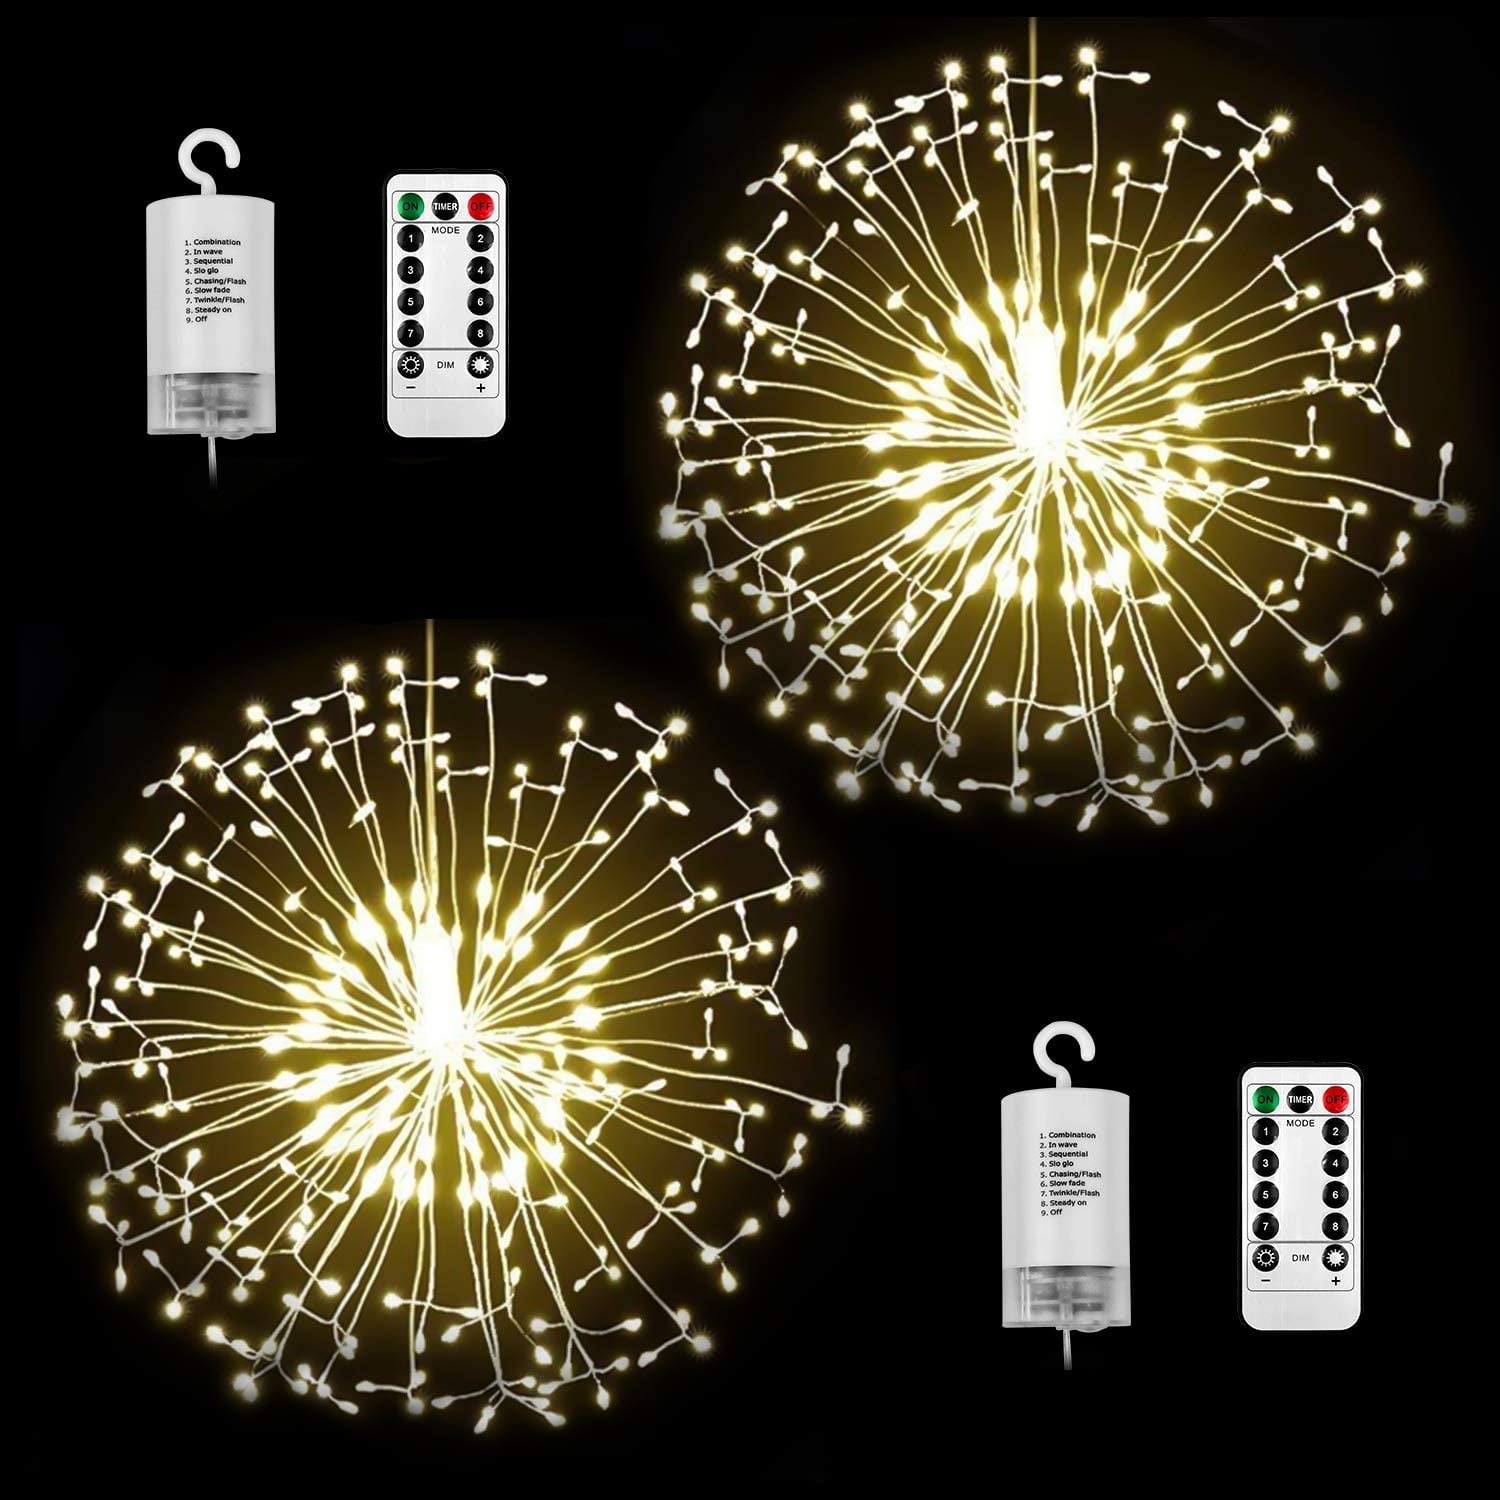 Warm White,2 Pack Hanging Starburst String Lights,2 Pack 8 Modes Waterproof 200 LED Bouquet Shape Fireworks Fairy Twinkle Light Battery Operated With Remote Control For Home,Gardens,Patios,Study. 